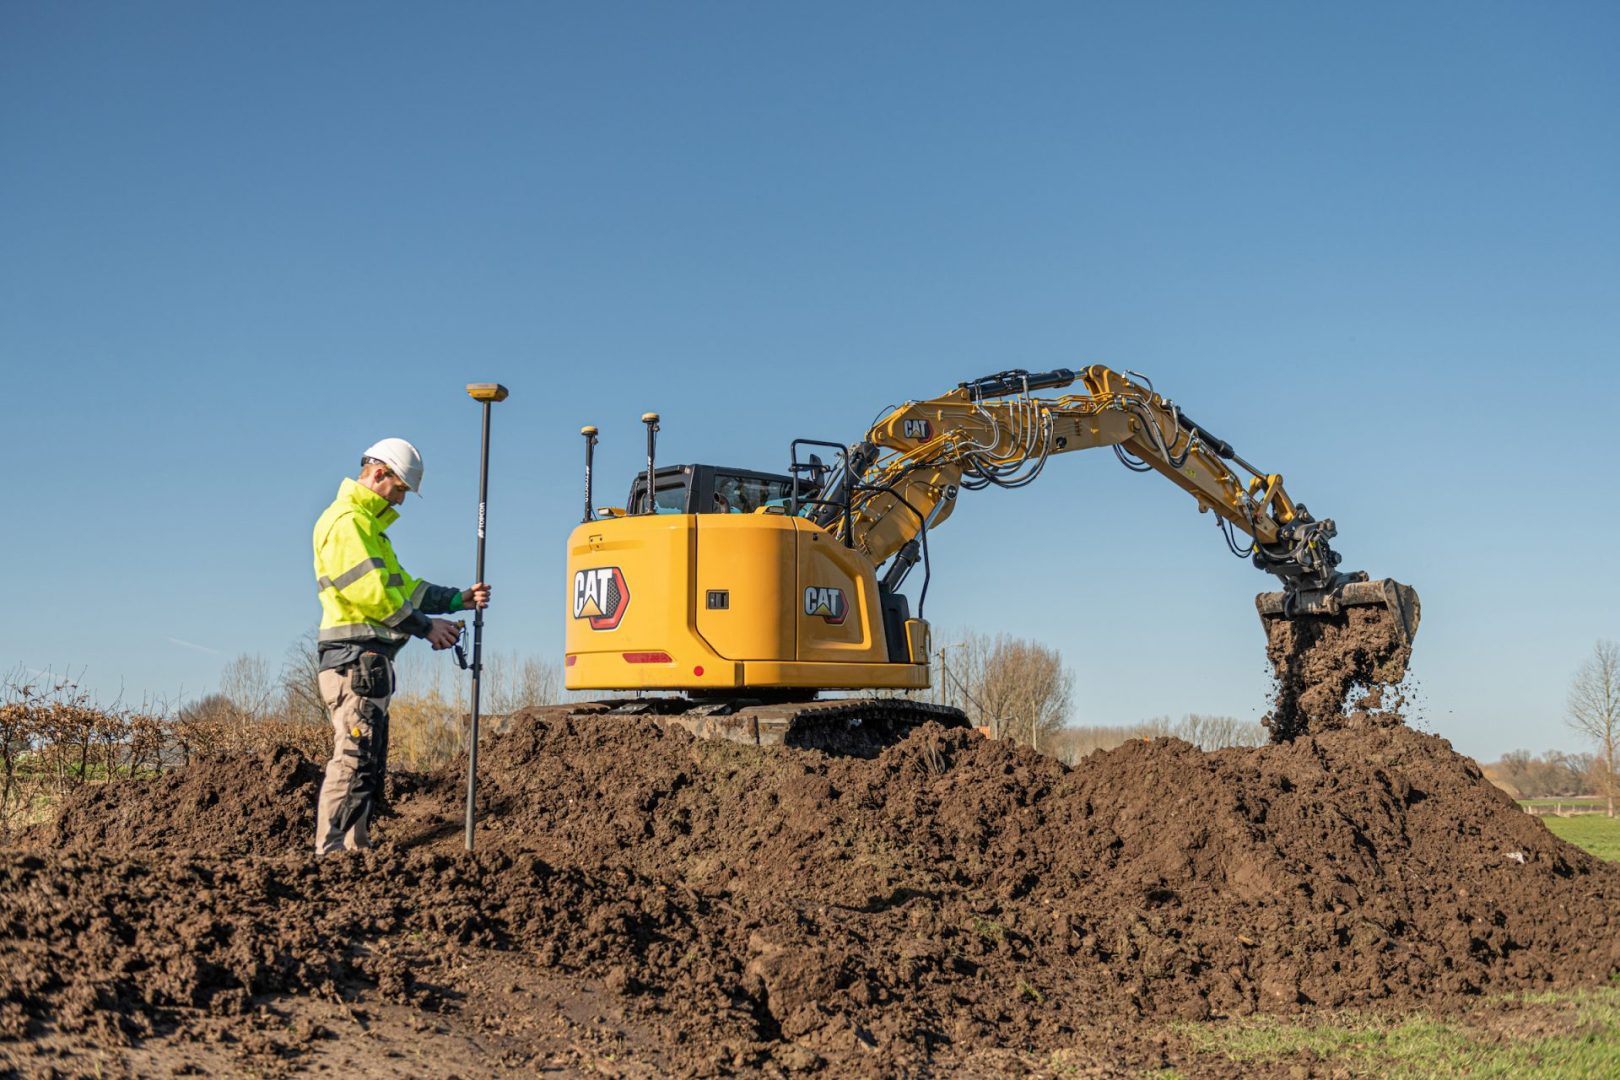 a caterpillar excavator equipped with Topcon